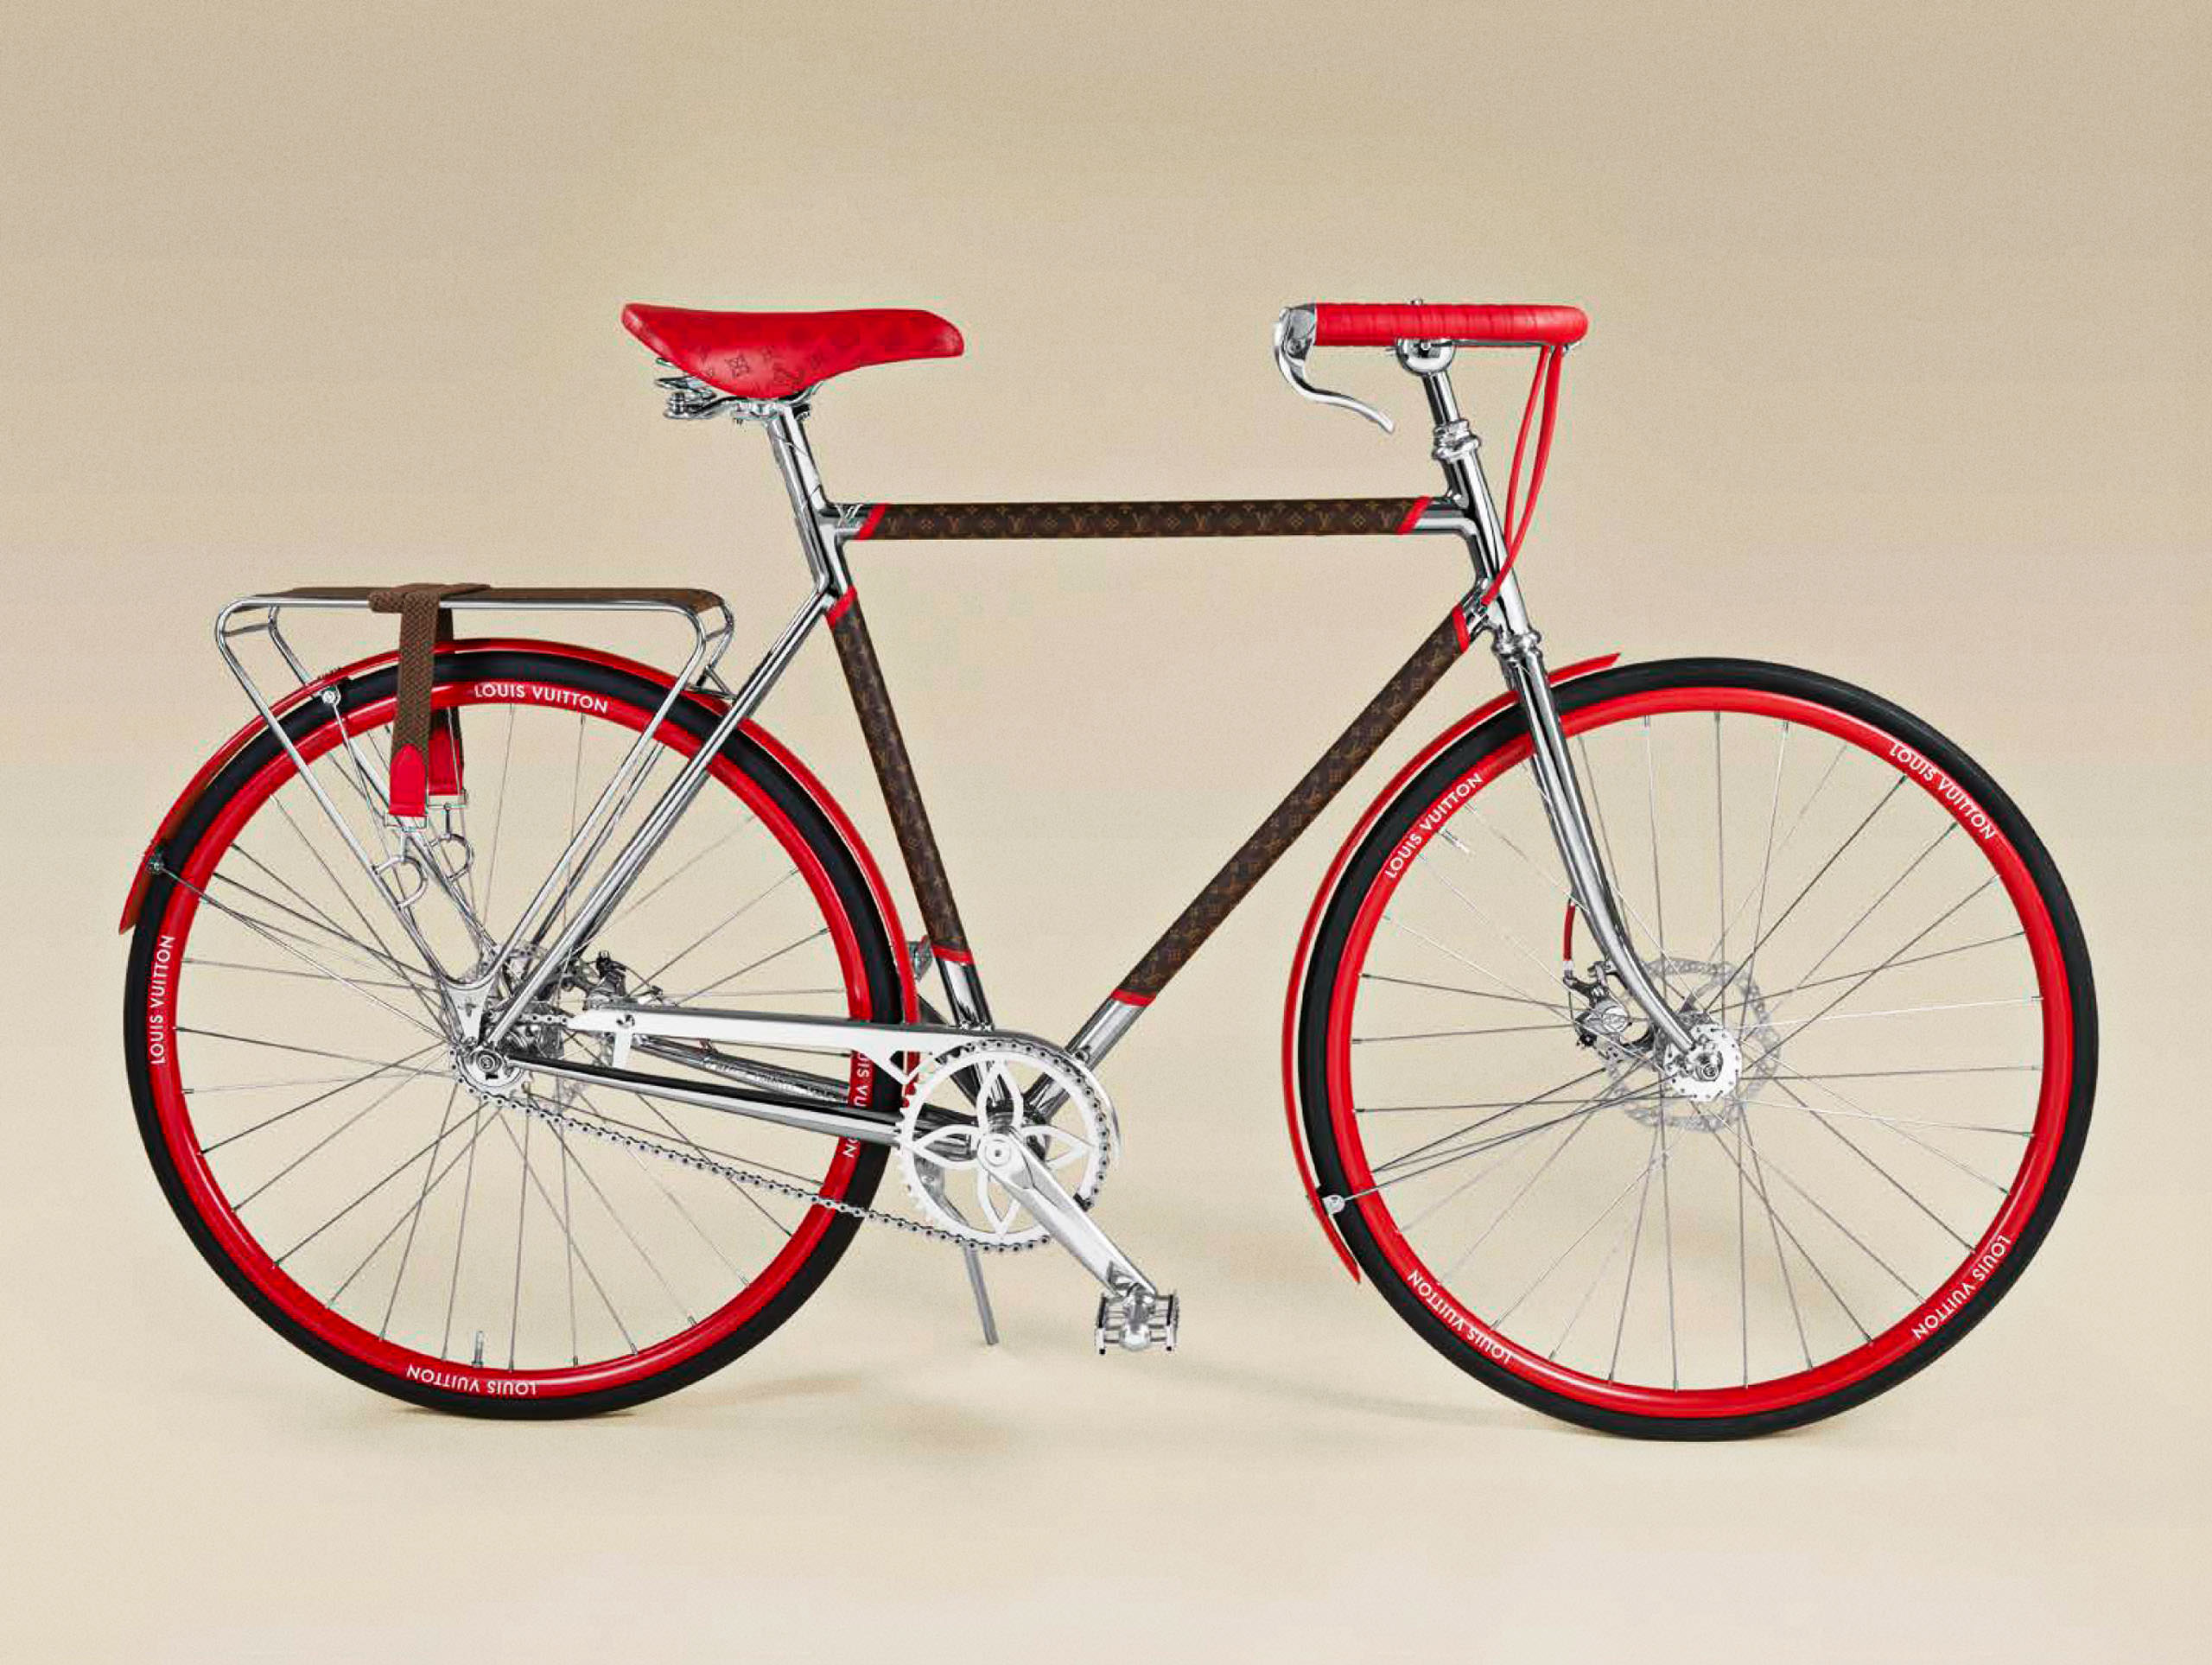 METCHA  Louis Vuitton Bike can take you to any landscape.